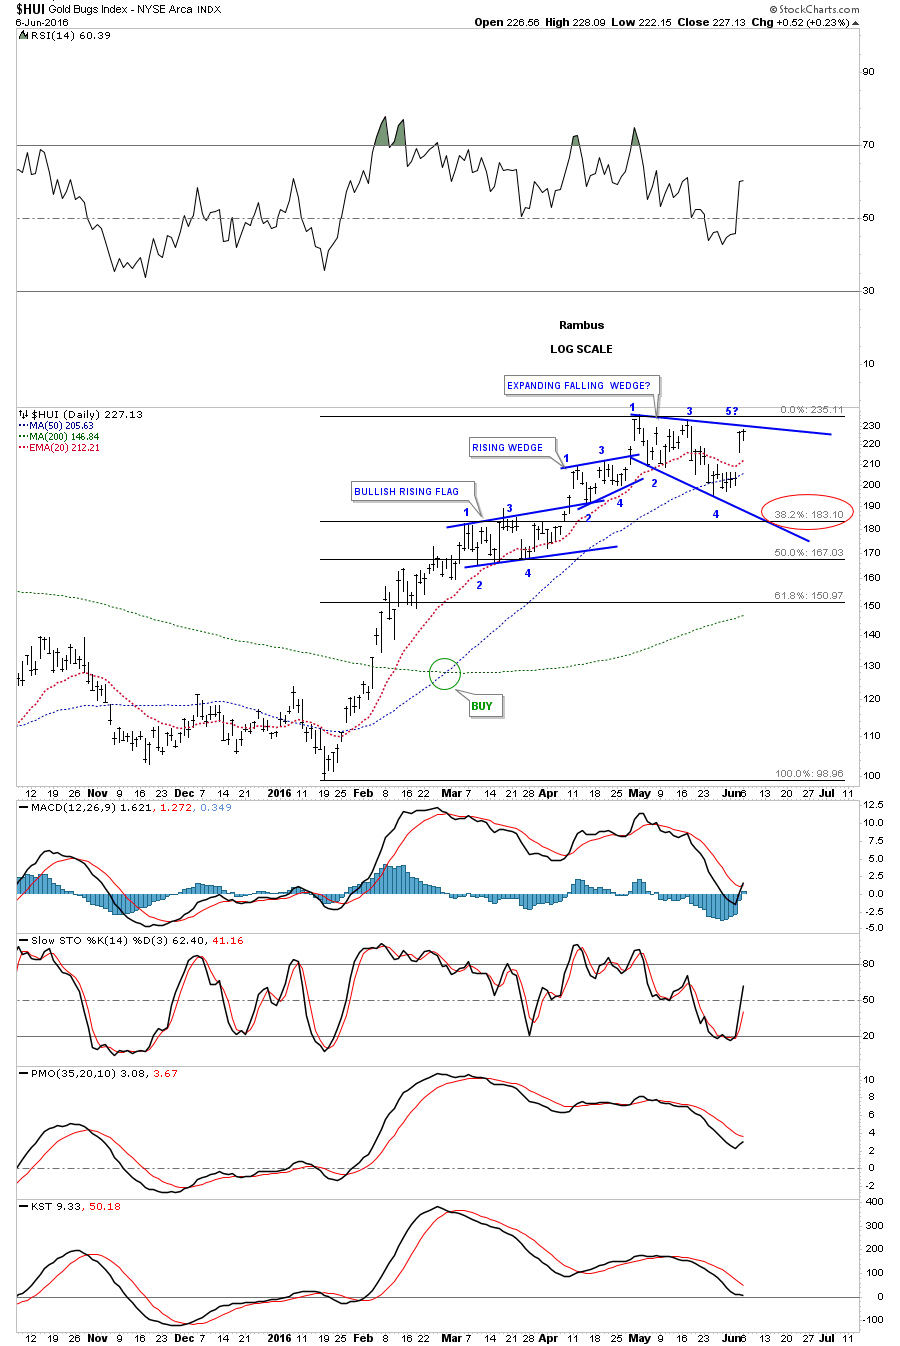 HUI Daily with Expanding Falling Wedge